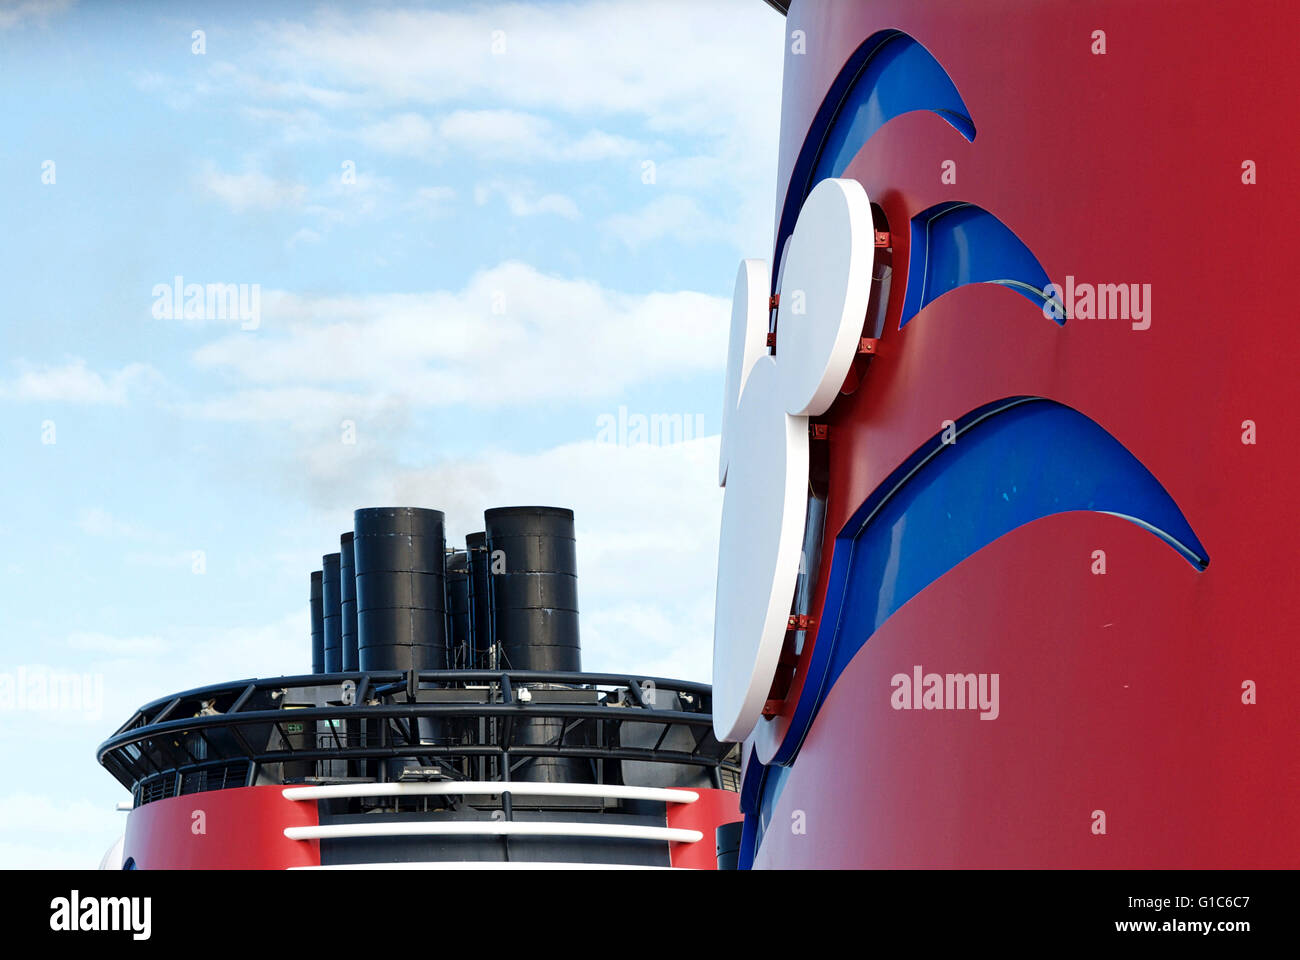 Close-up image of the smokestack of the Disney Dream cruise ship and logo during a cruise between the U.S. and The Bahamas. Stock Photo